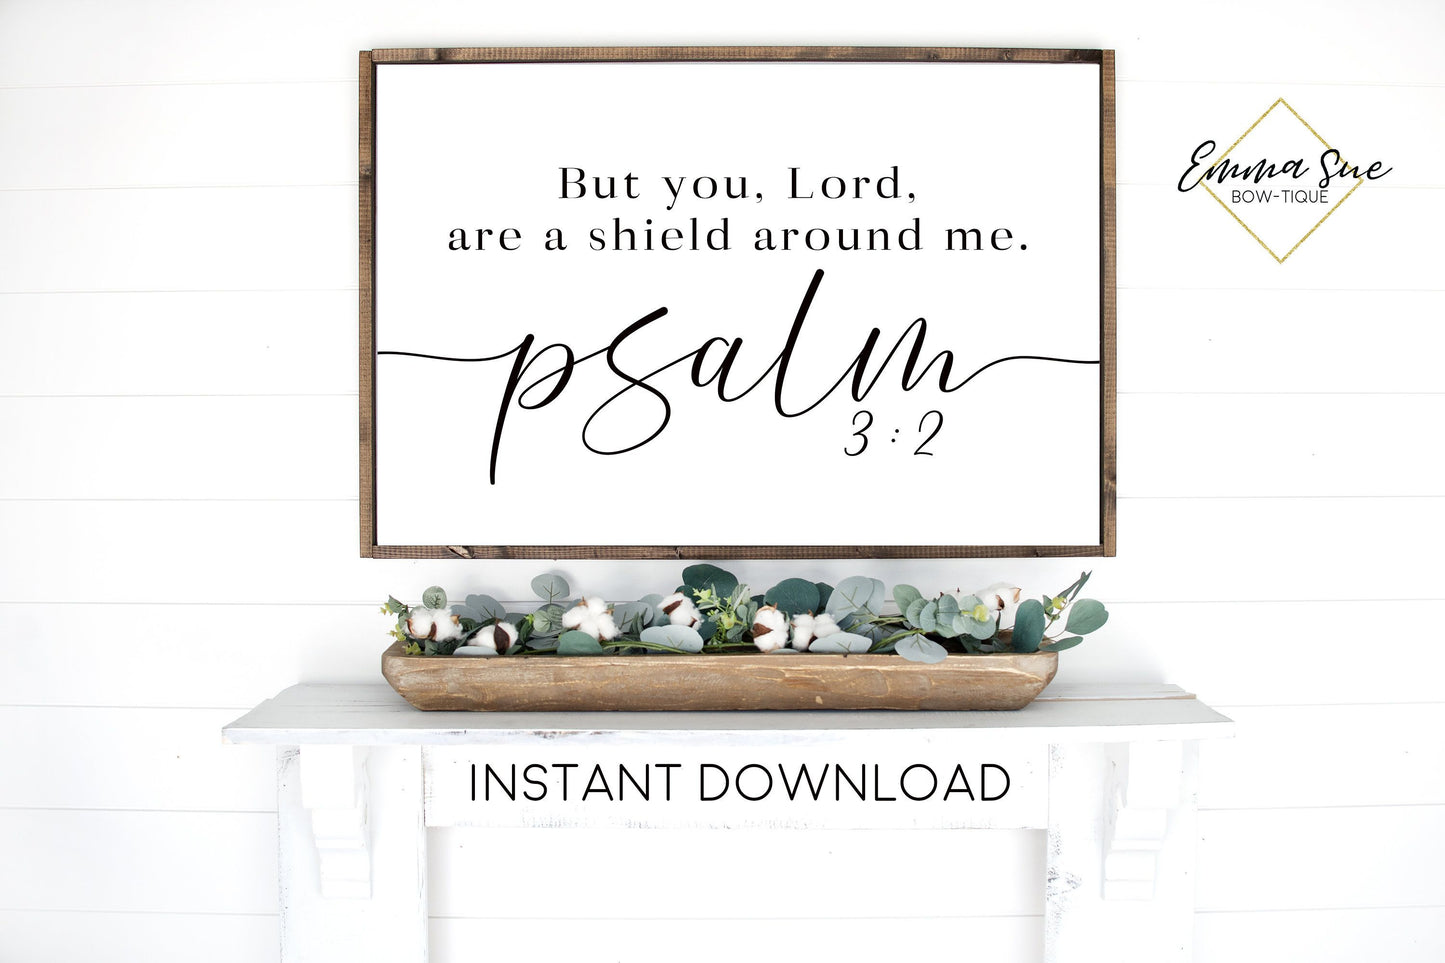 But you, Lord, are a shield around me Psalm 3:2 Bible Verse Printable Sign Wall Art